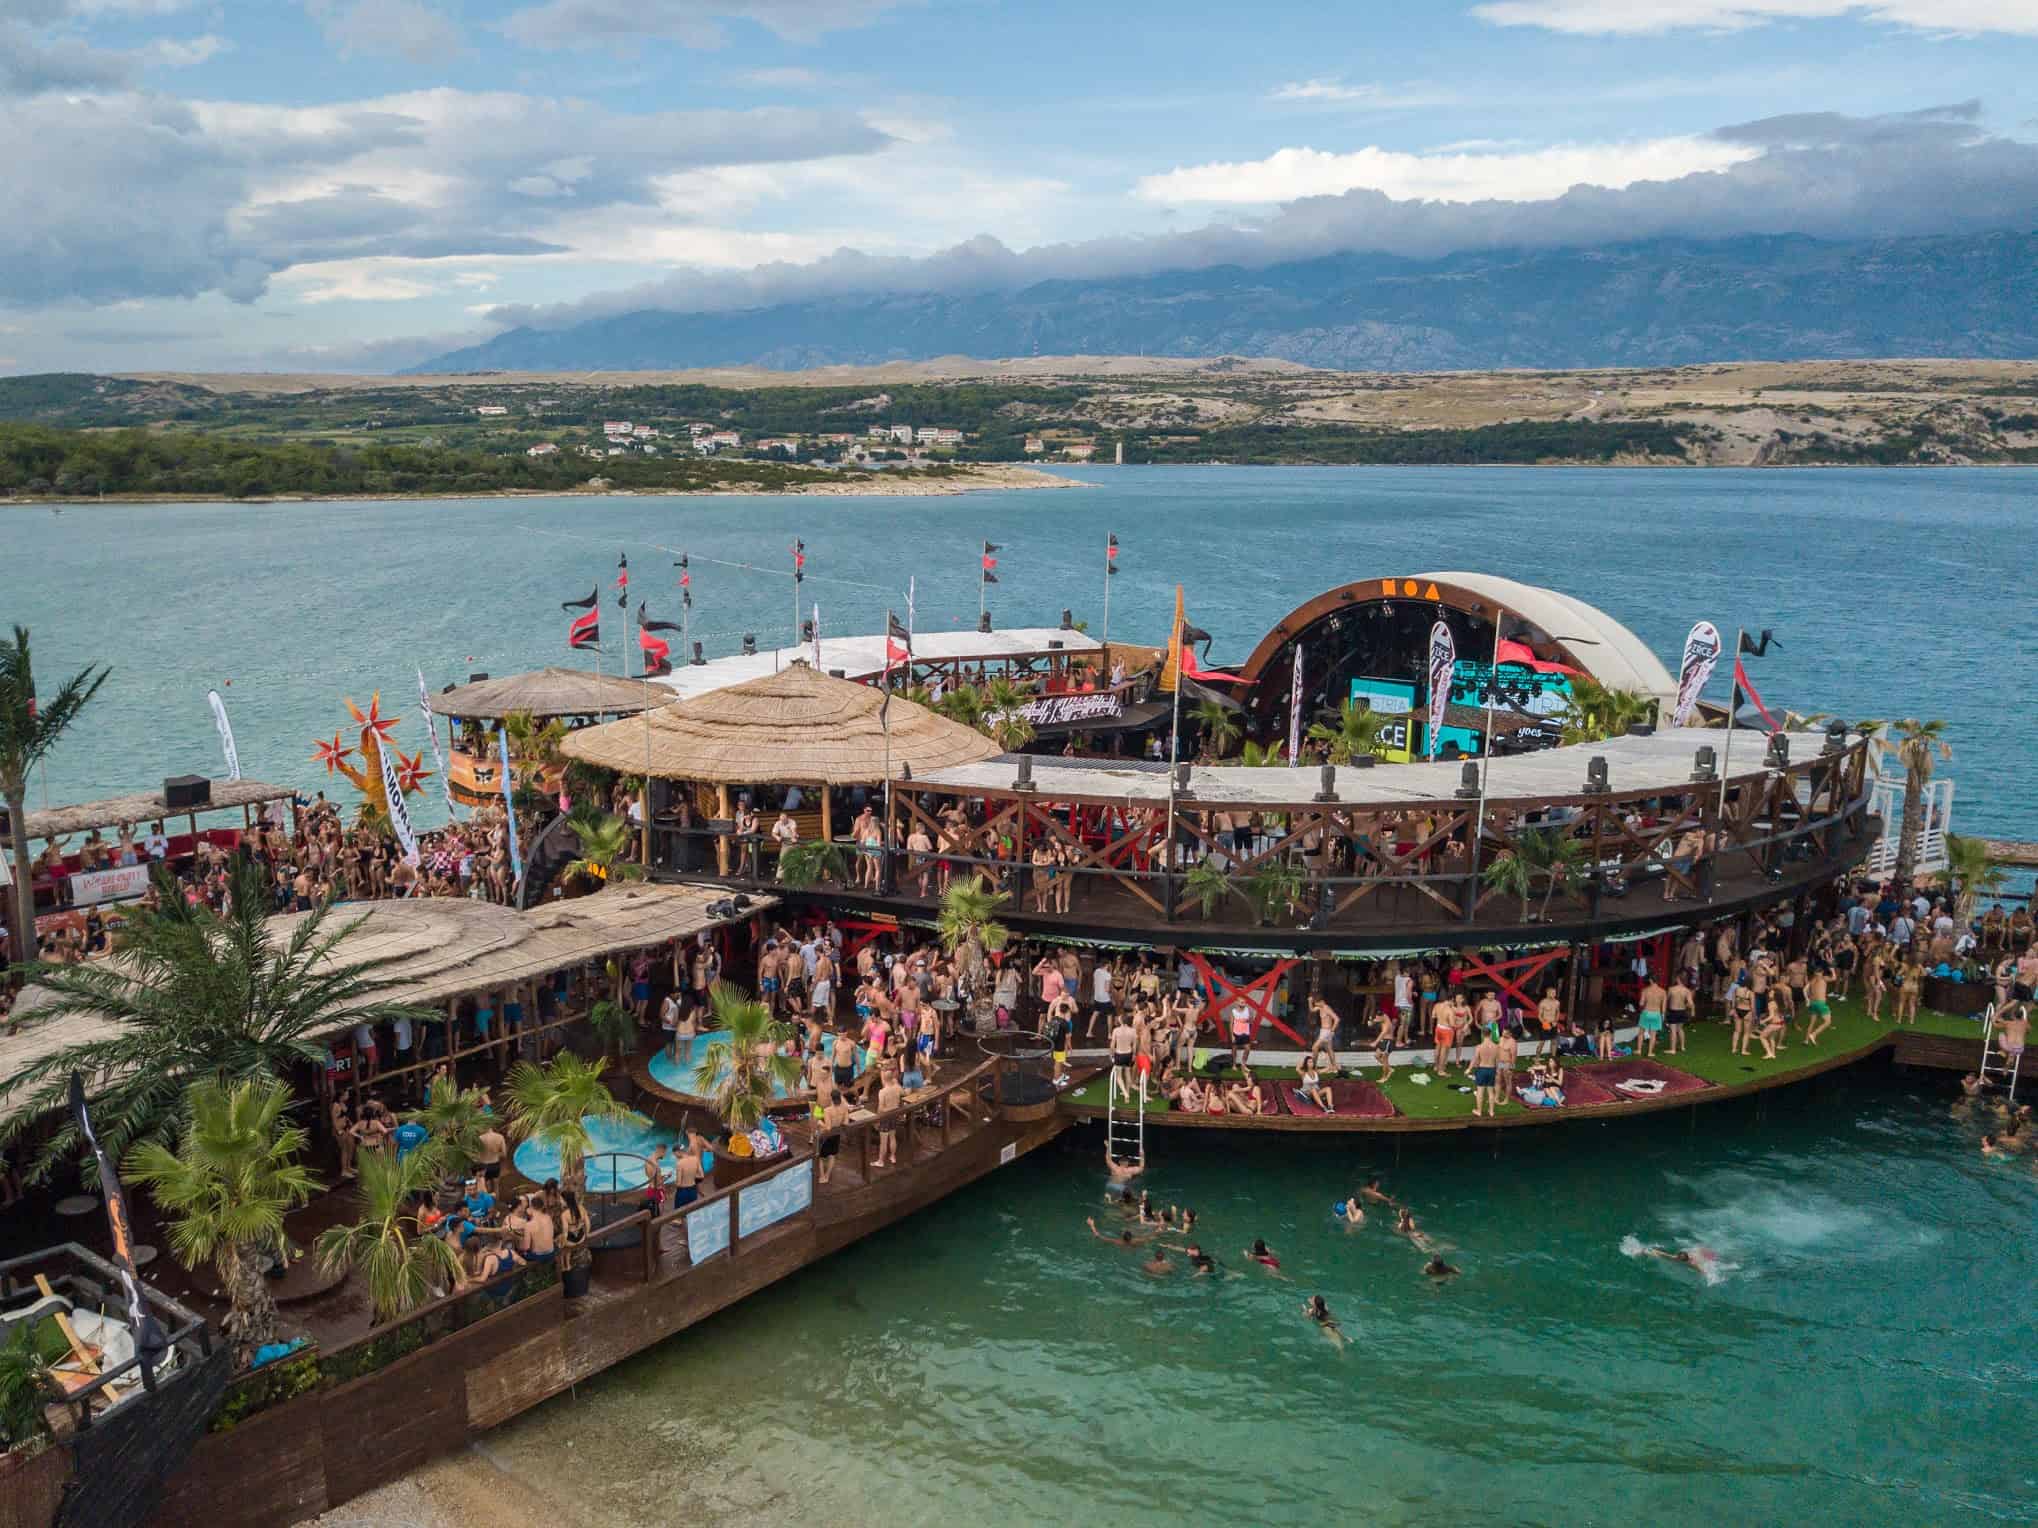 Senses in Croatia, one of the first festivals of the summer, announces massive first phase lineup